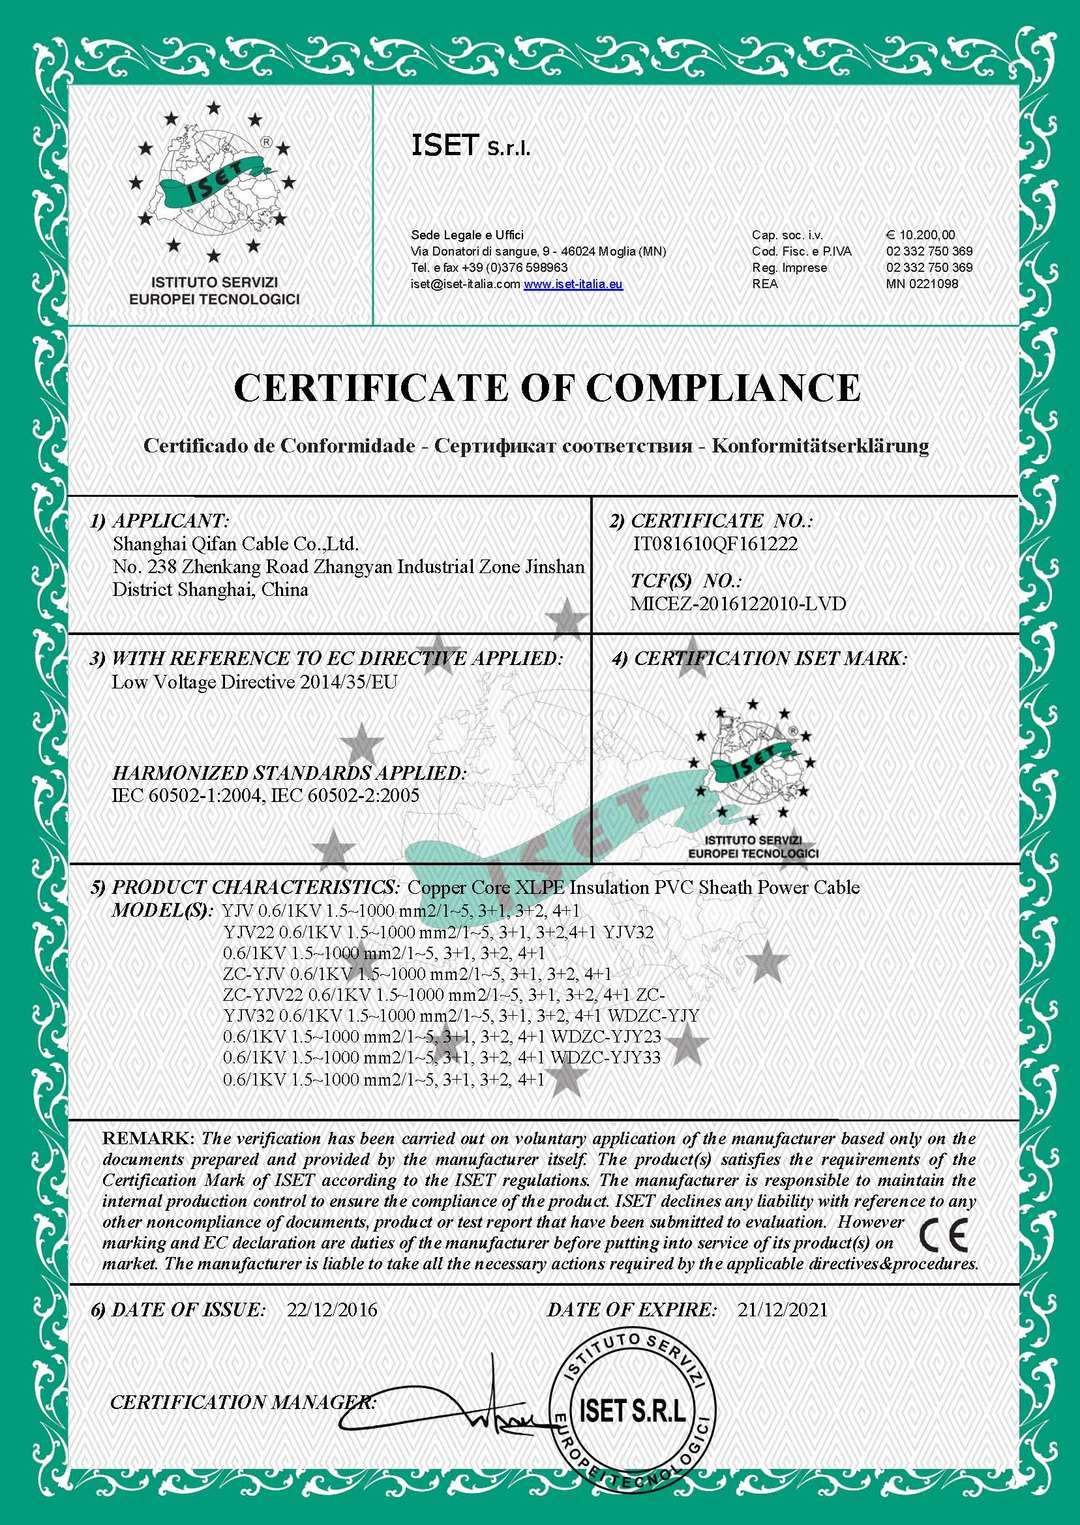 CE certificate - LV Power Cable